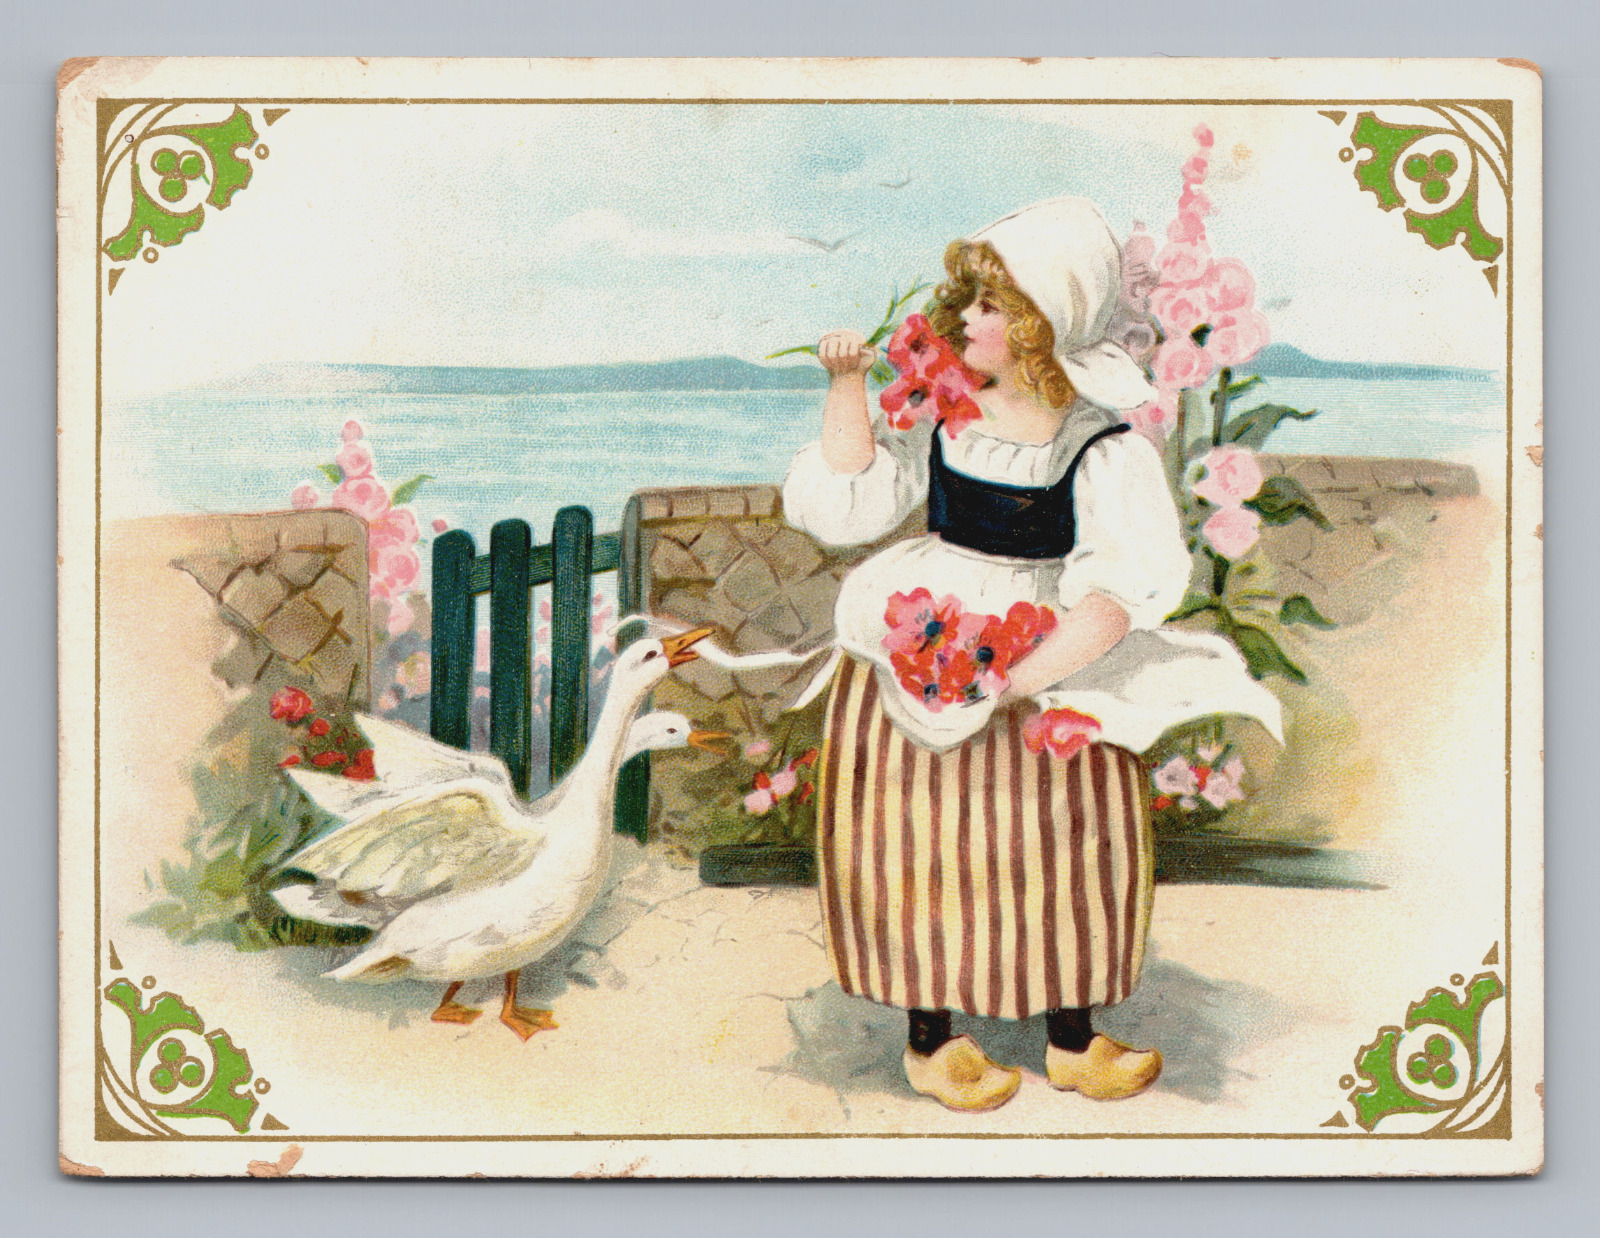 No Ad Trade Card Girl With Flowers Geese Sea View Wooden Shoes